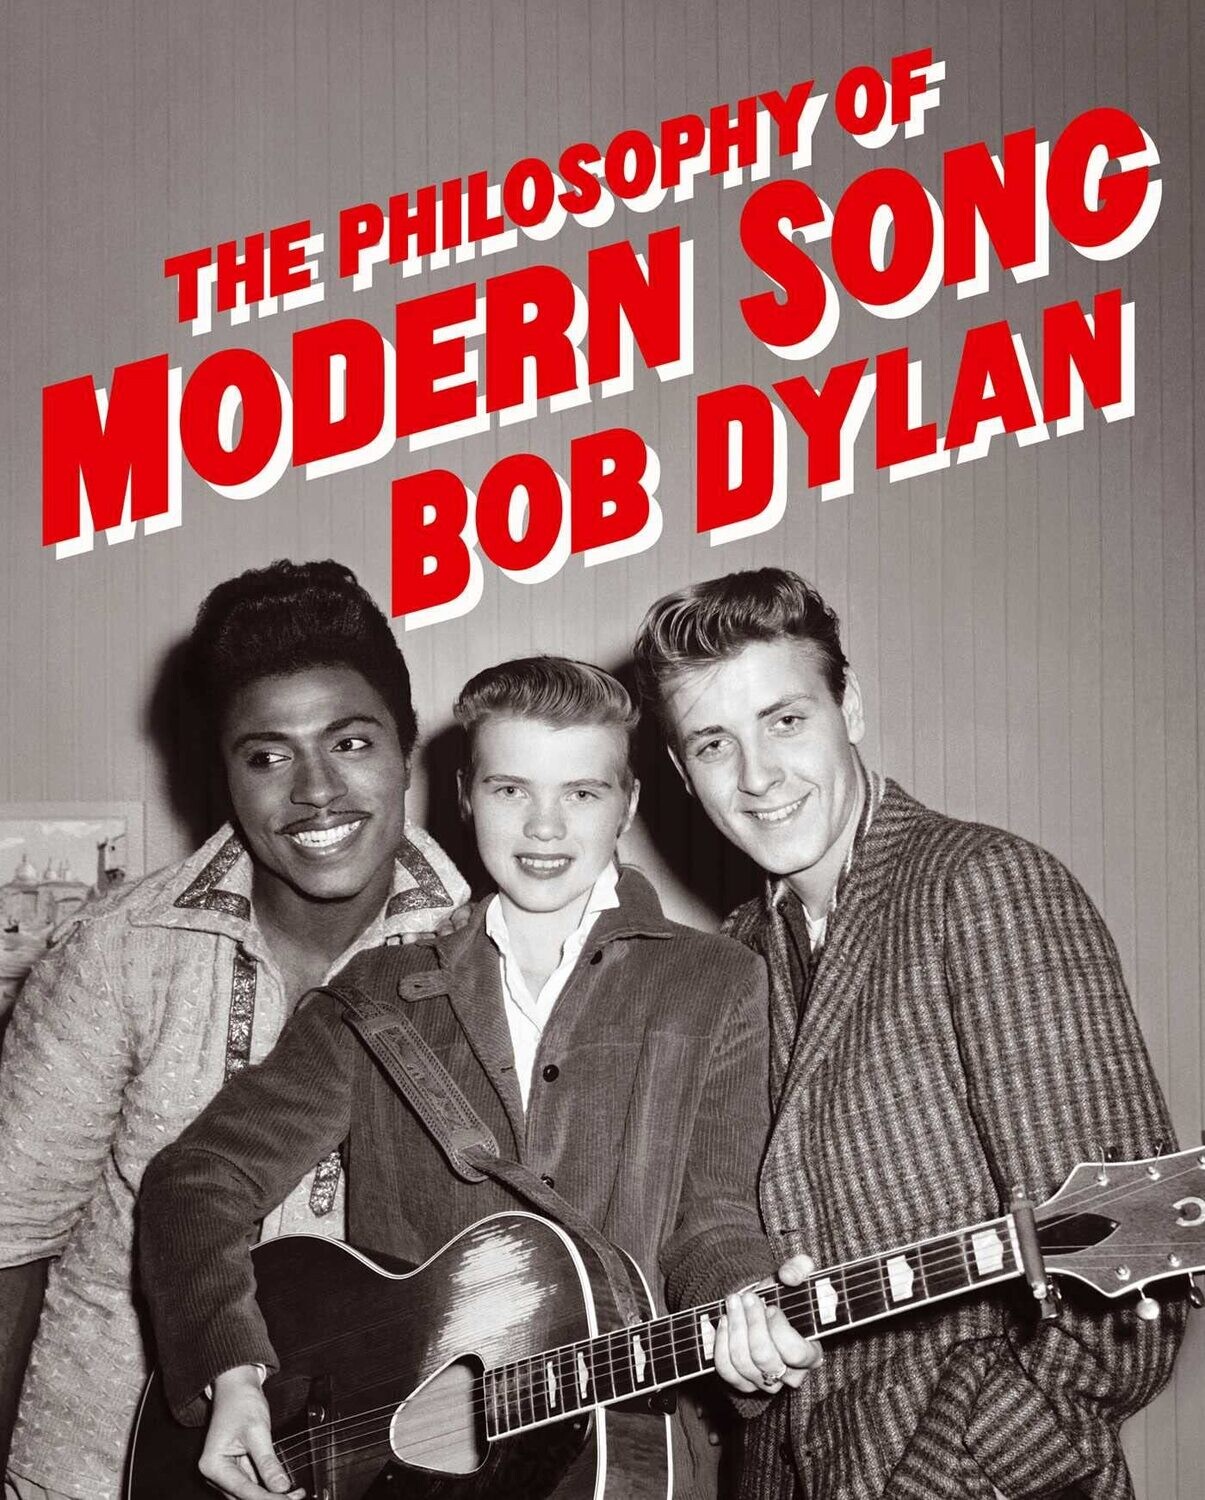 The Philosophy of Modern Song Hardcover by Bob Dylan (Hardcover, NEW)